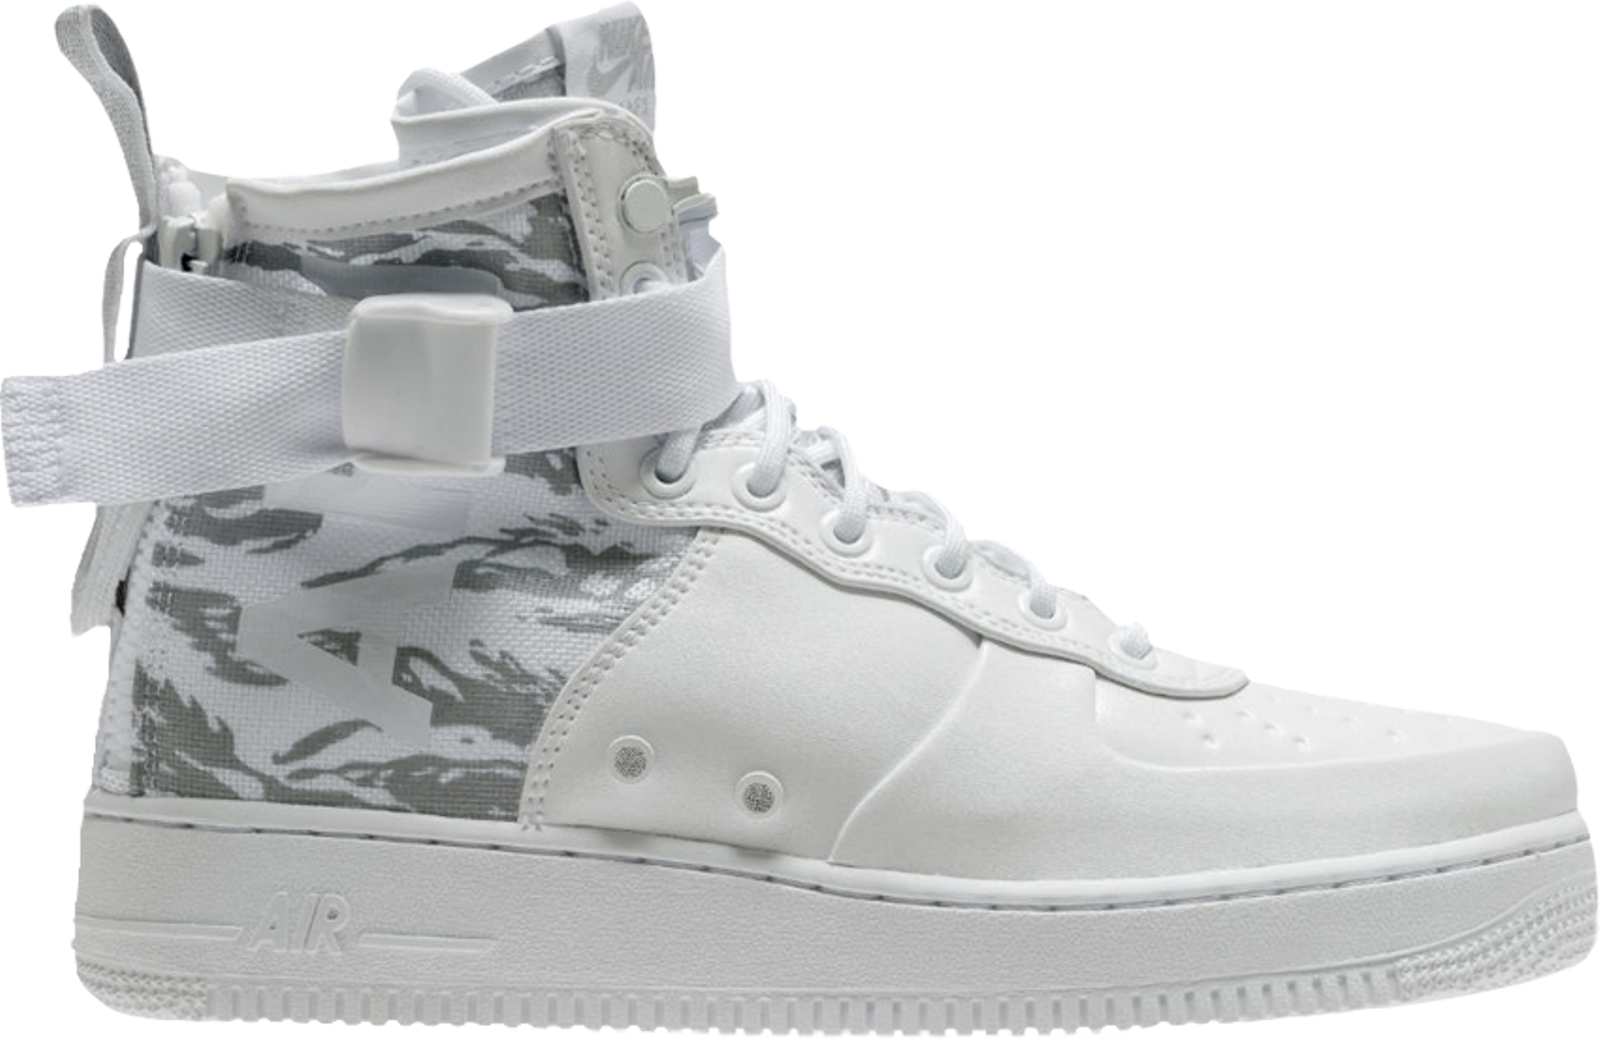 Buy SF Air Force 1 Mid 'Winter Camo' - AA1129 100 | GOAT